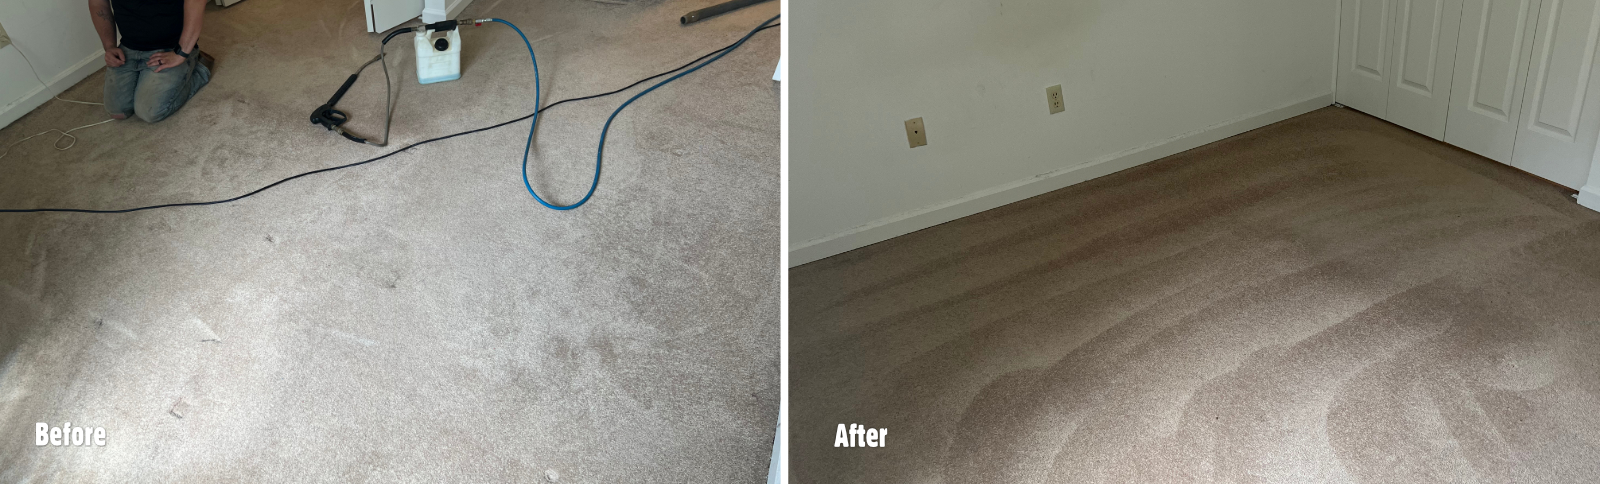 Rochester Carpet Cleaning Services Local Cleaner Greece